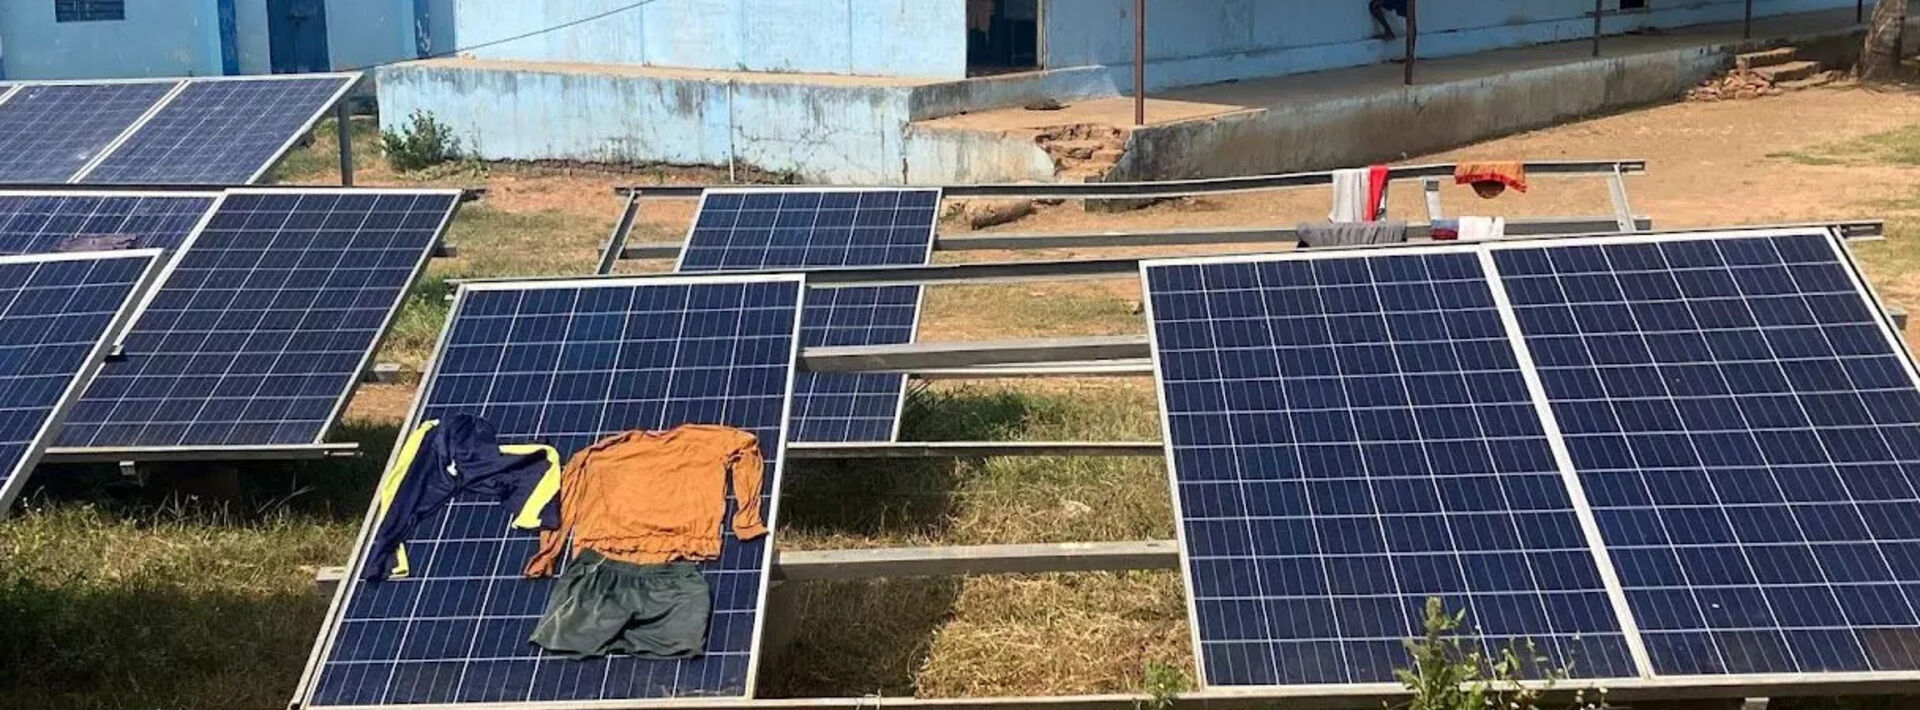 clothes drying on solar panel outdoors in front of blue building 